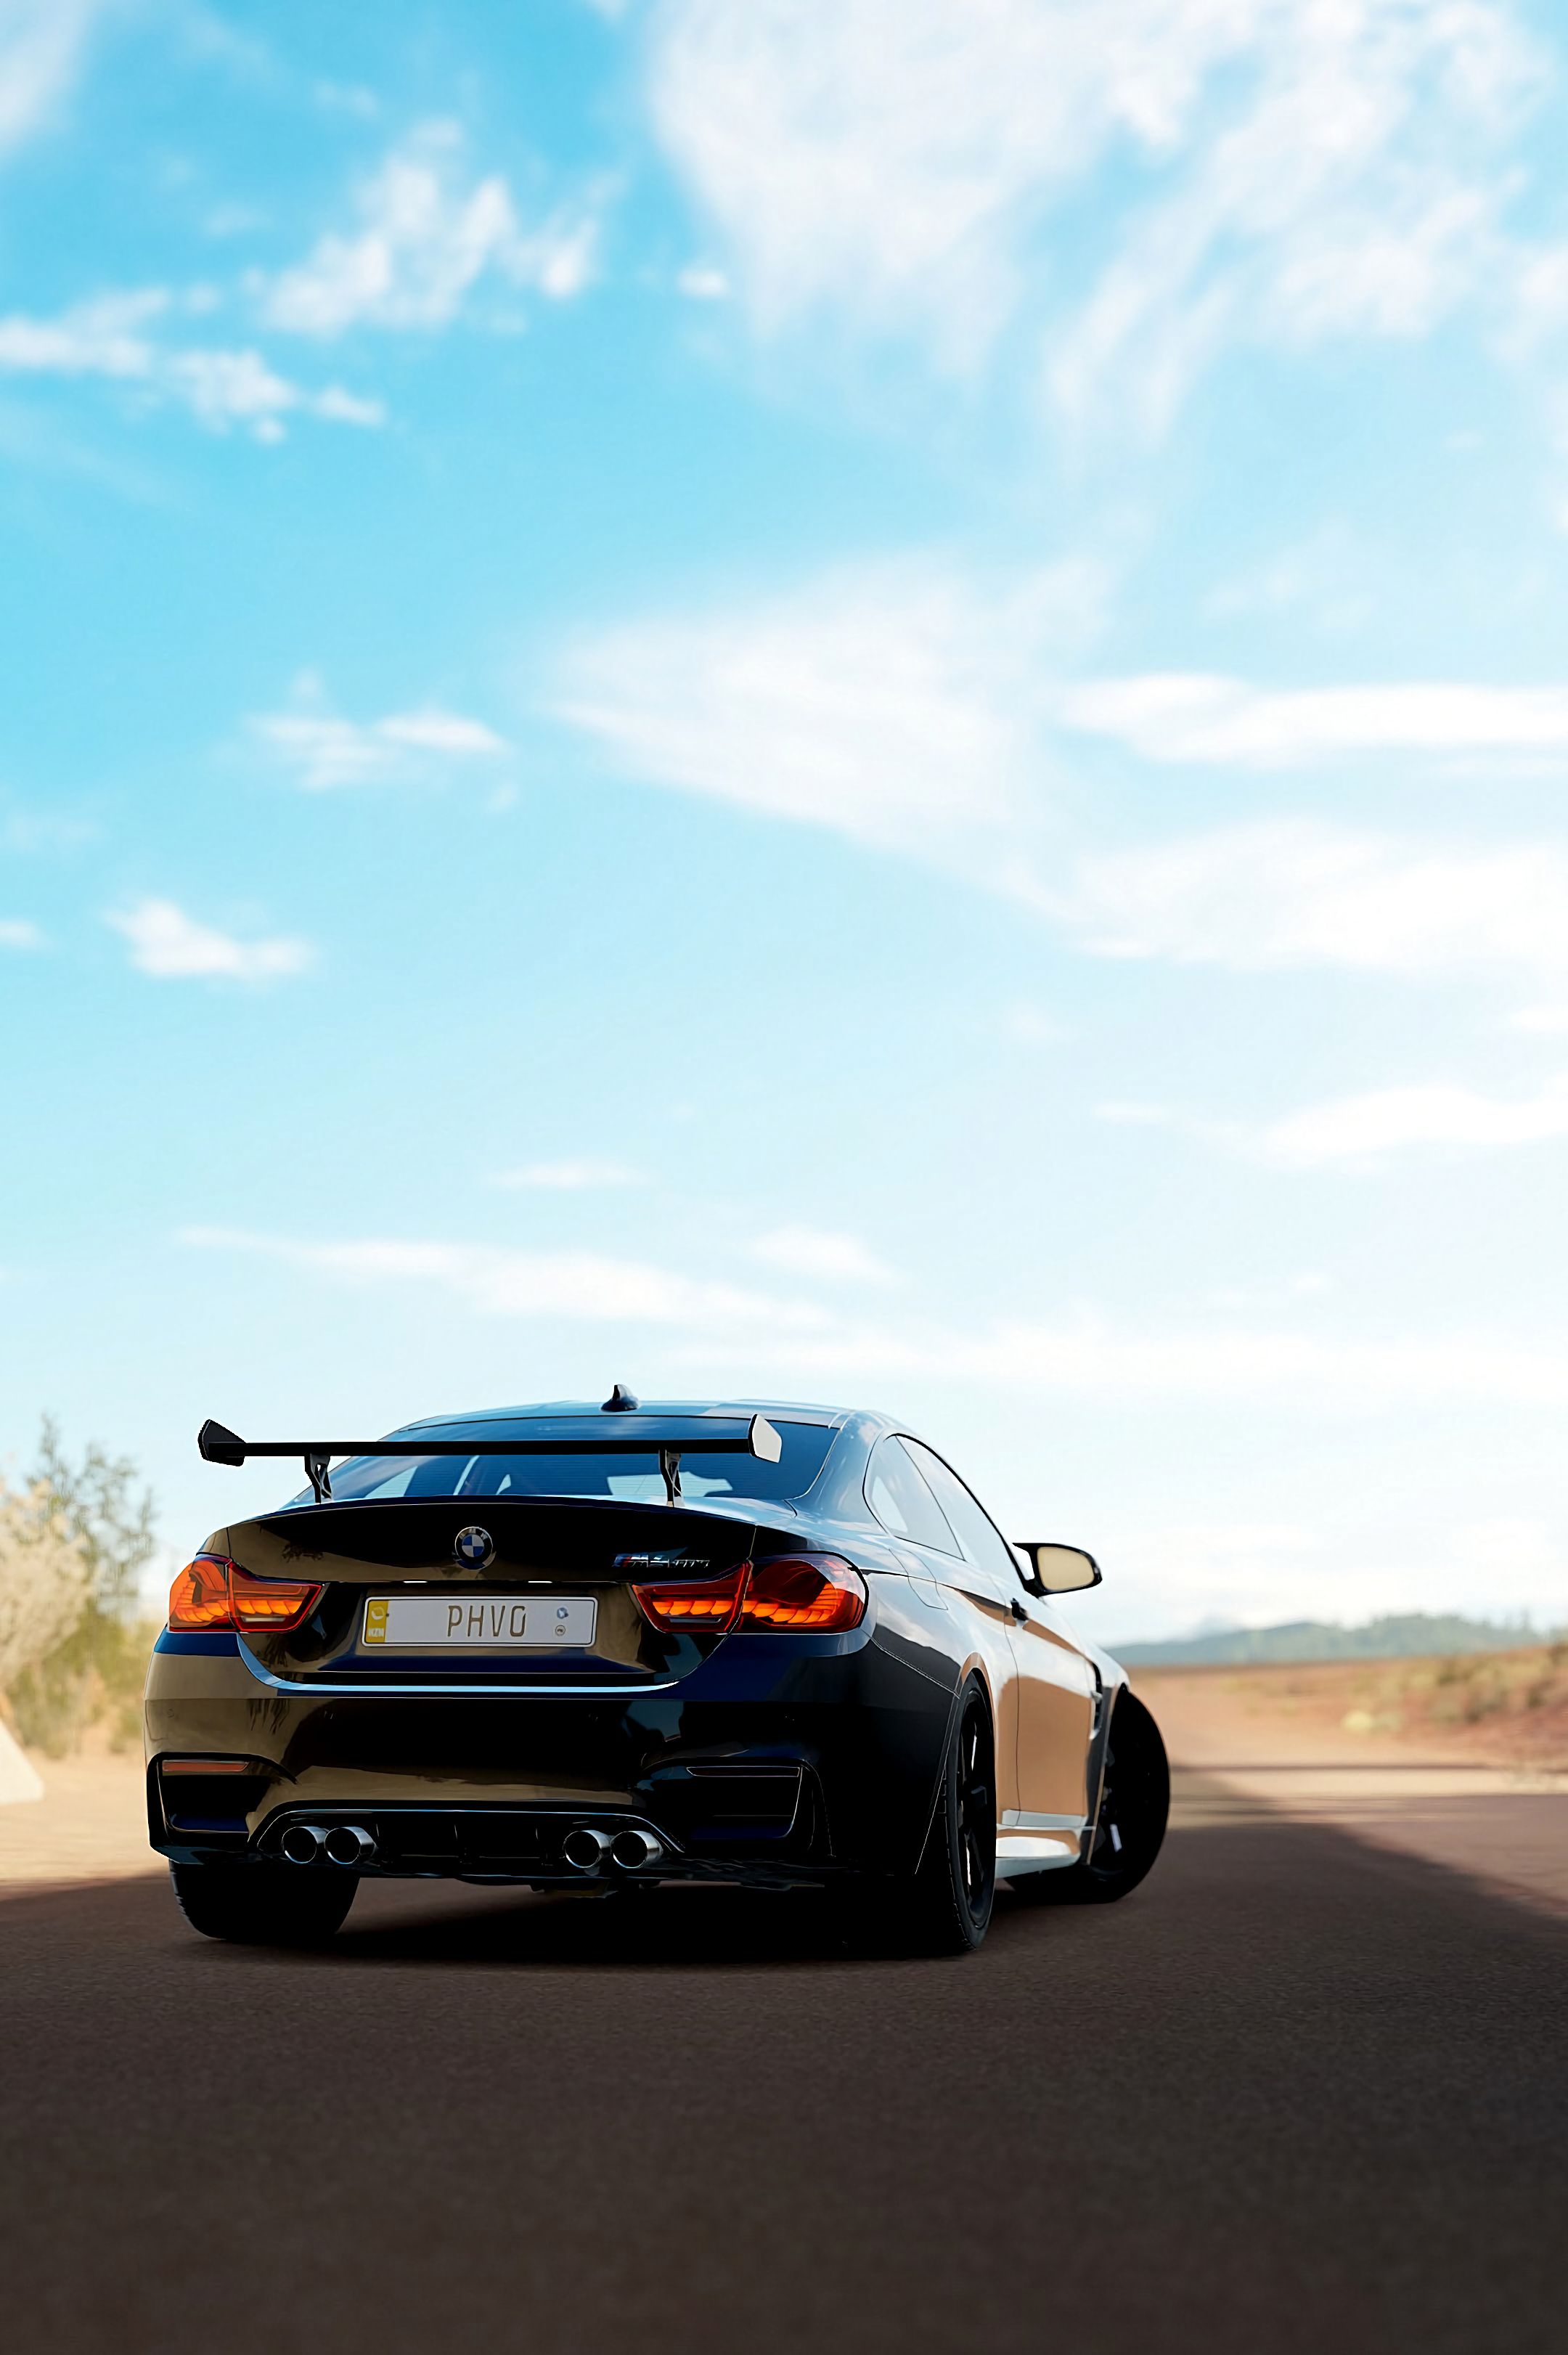 97811 download wallpaper bmw, races, cars, supercar, bmw m4, bmw m4 gts screensavers and pictures for free